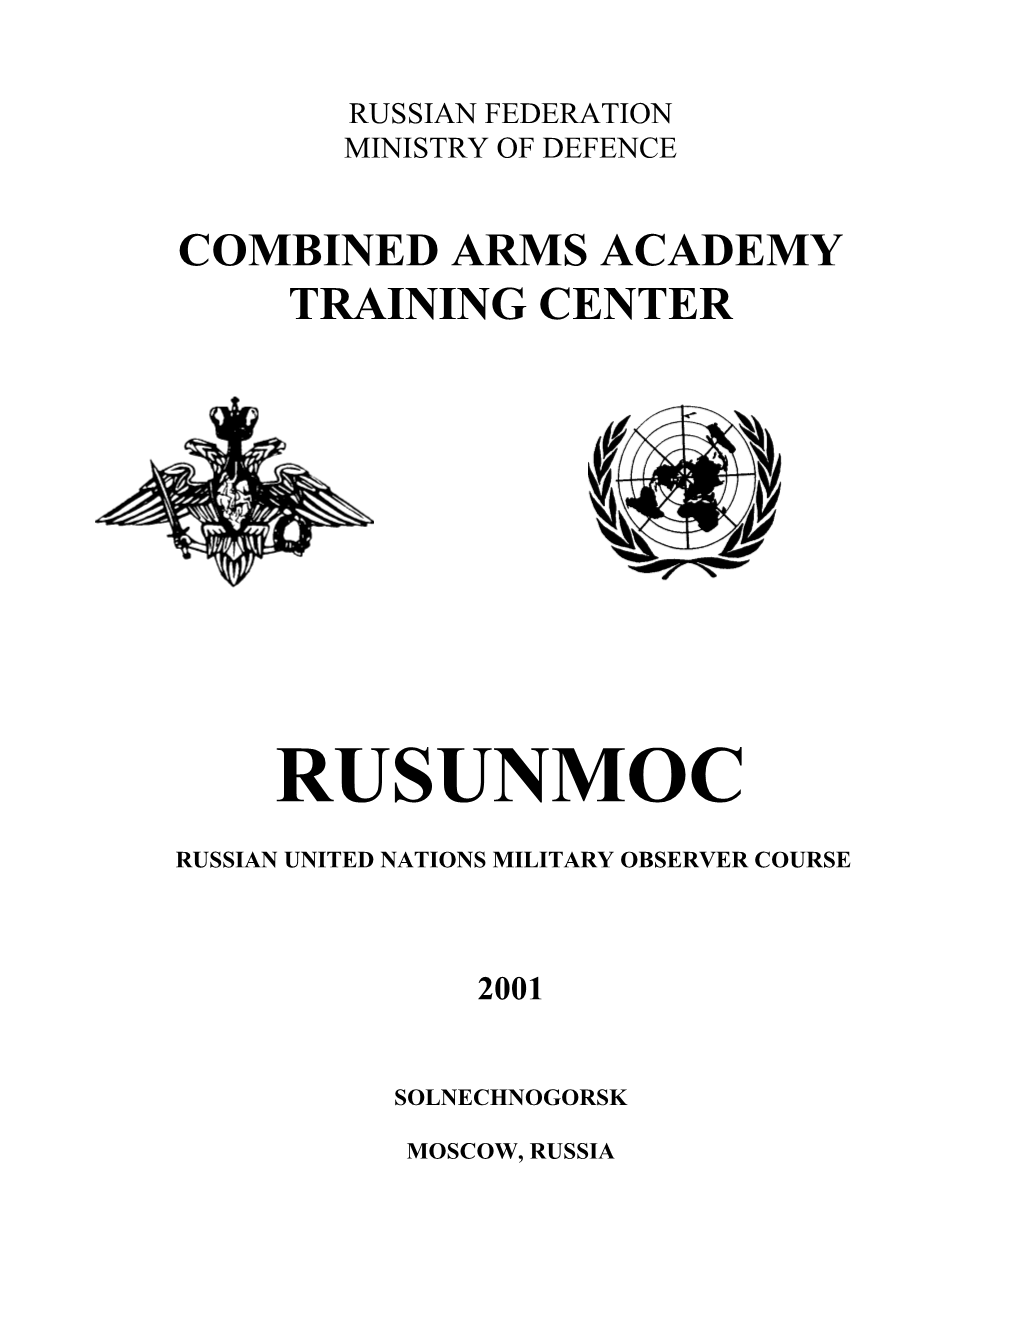 Combined Arms Academy